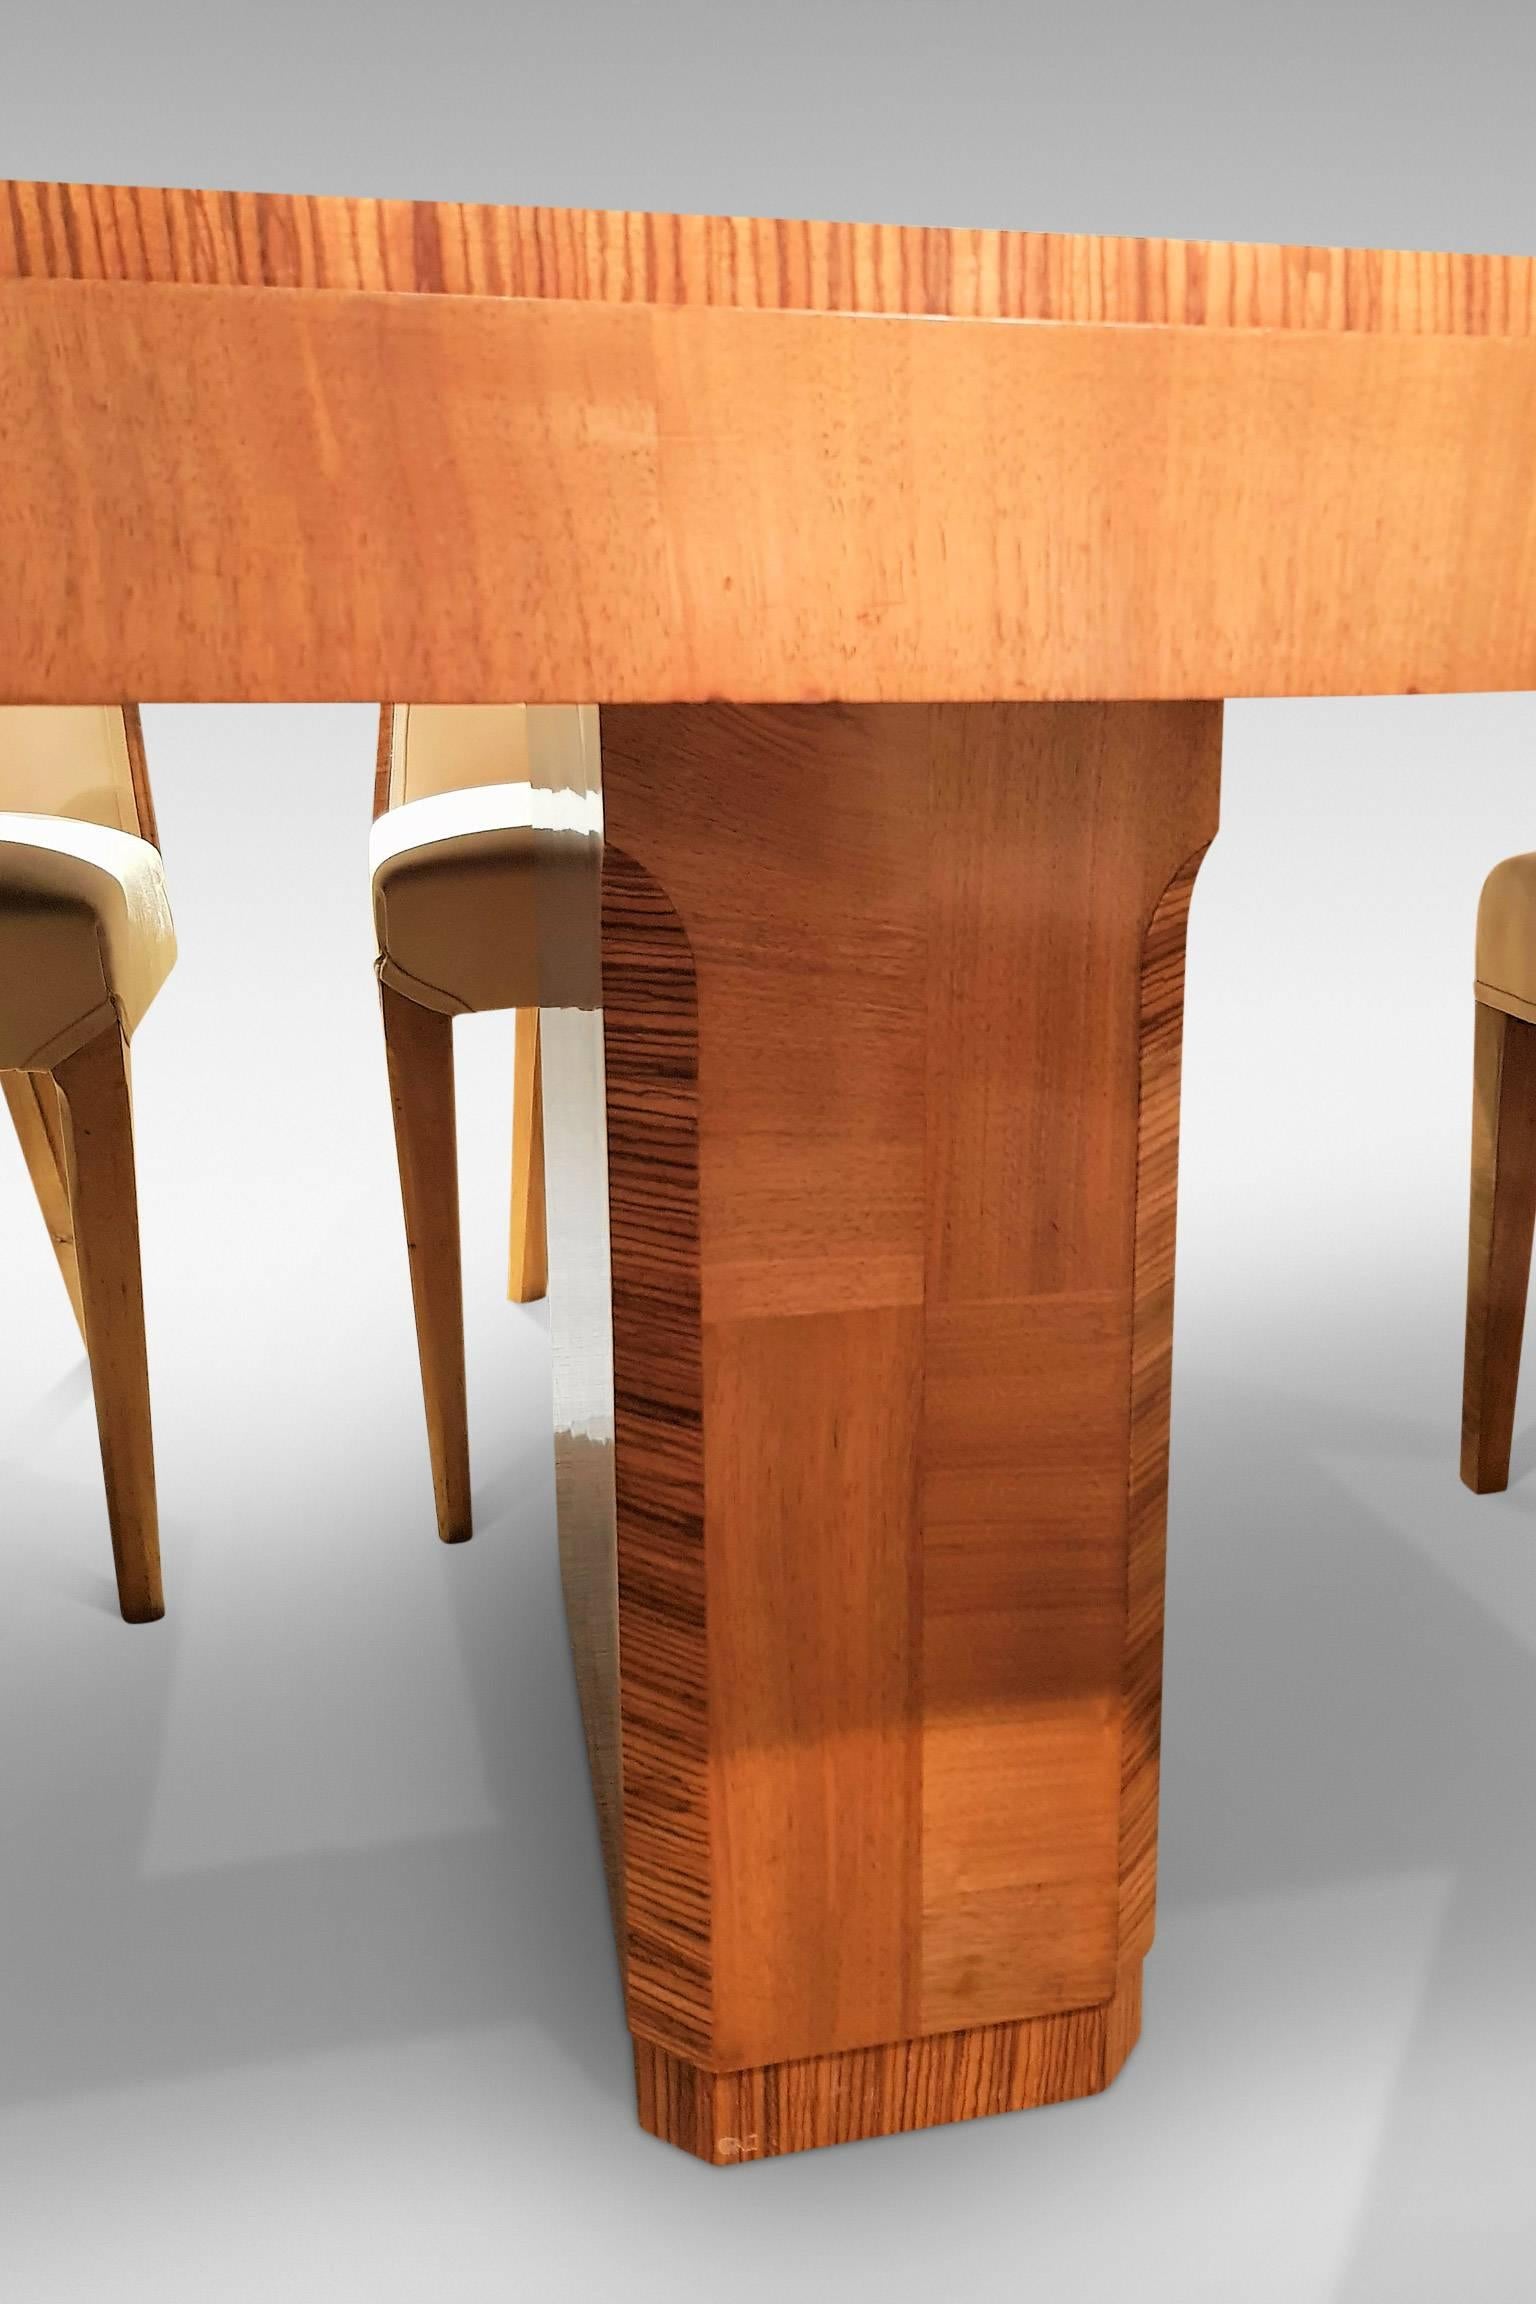 Veneer Art Deco Dining Table, Chairs and Carvers Attributed to Hille